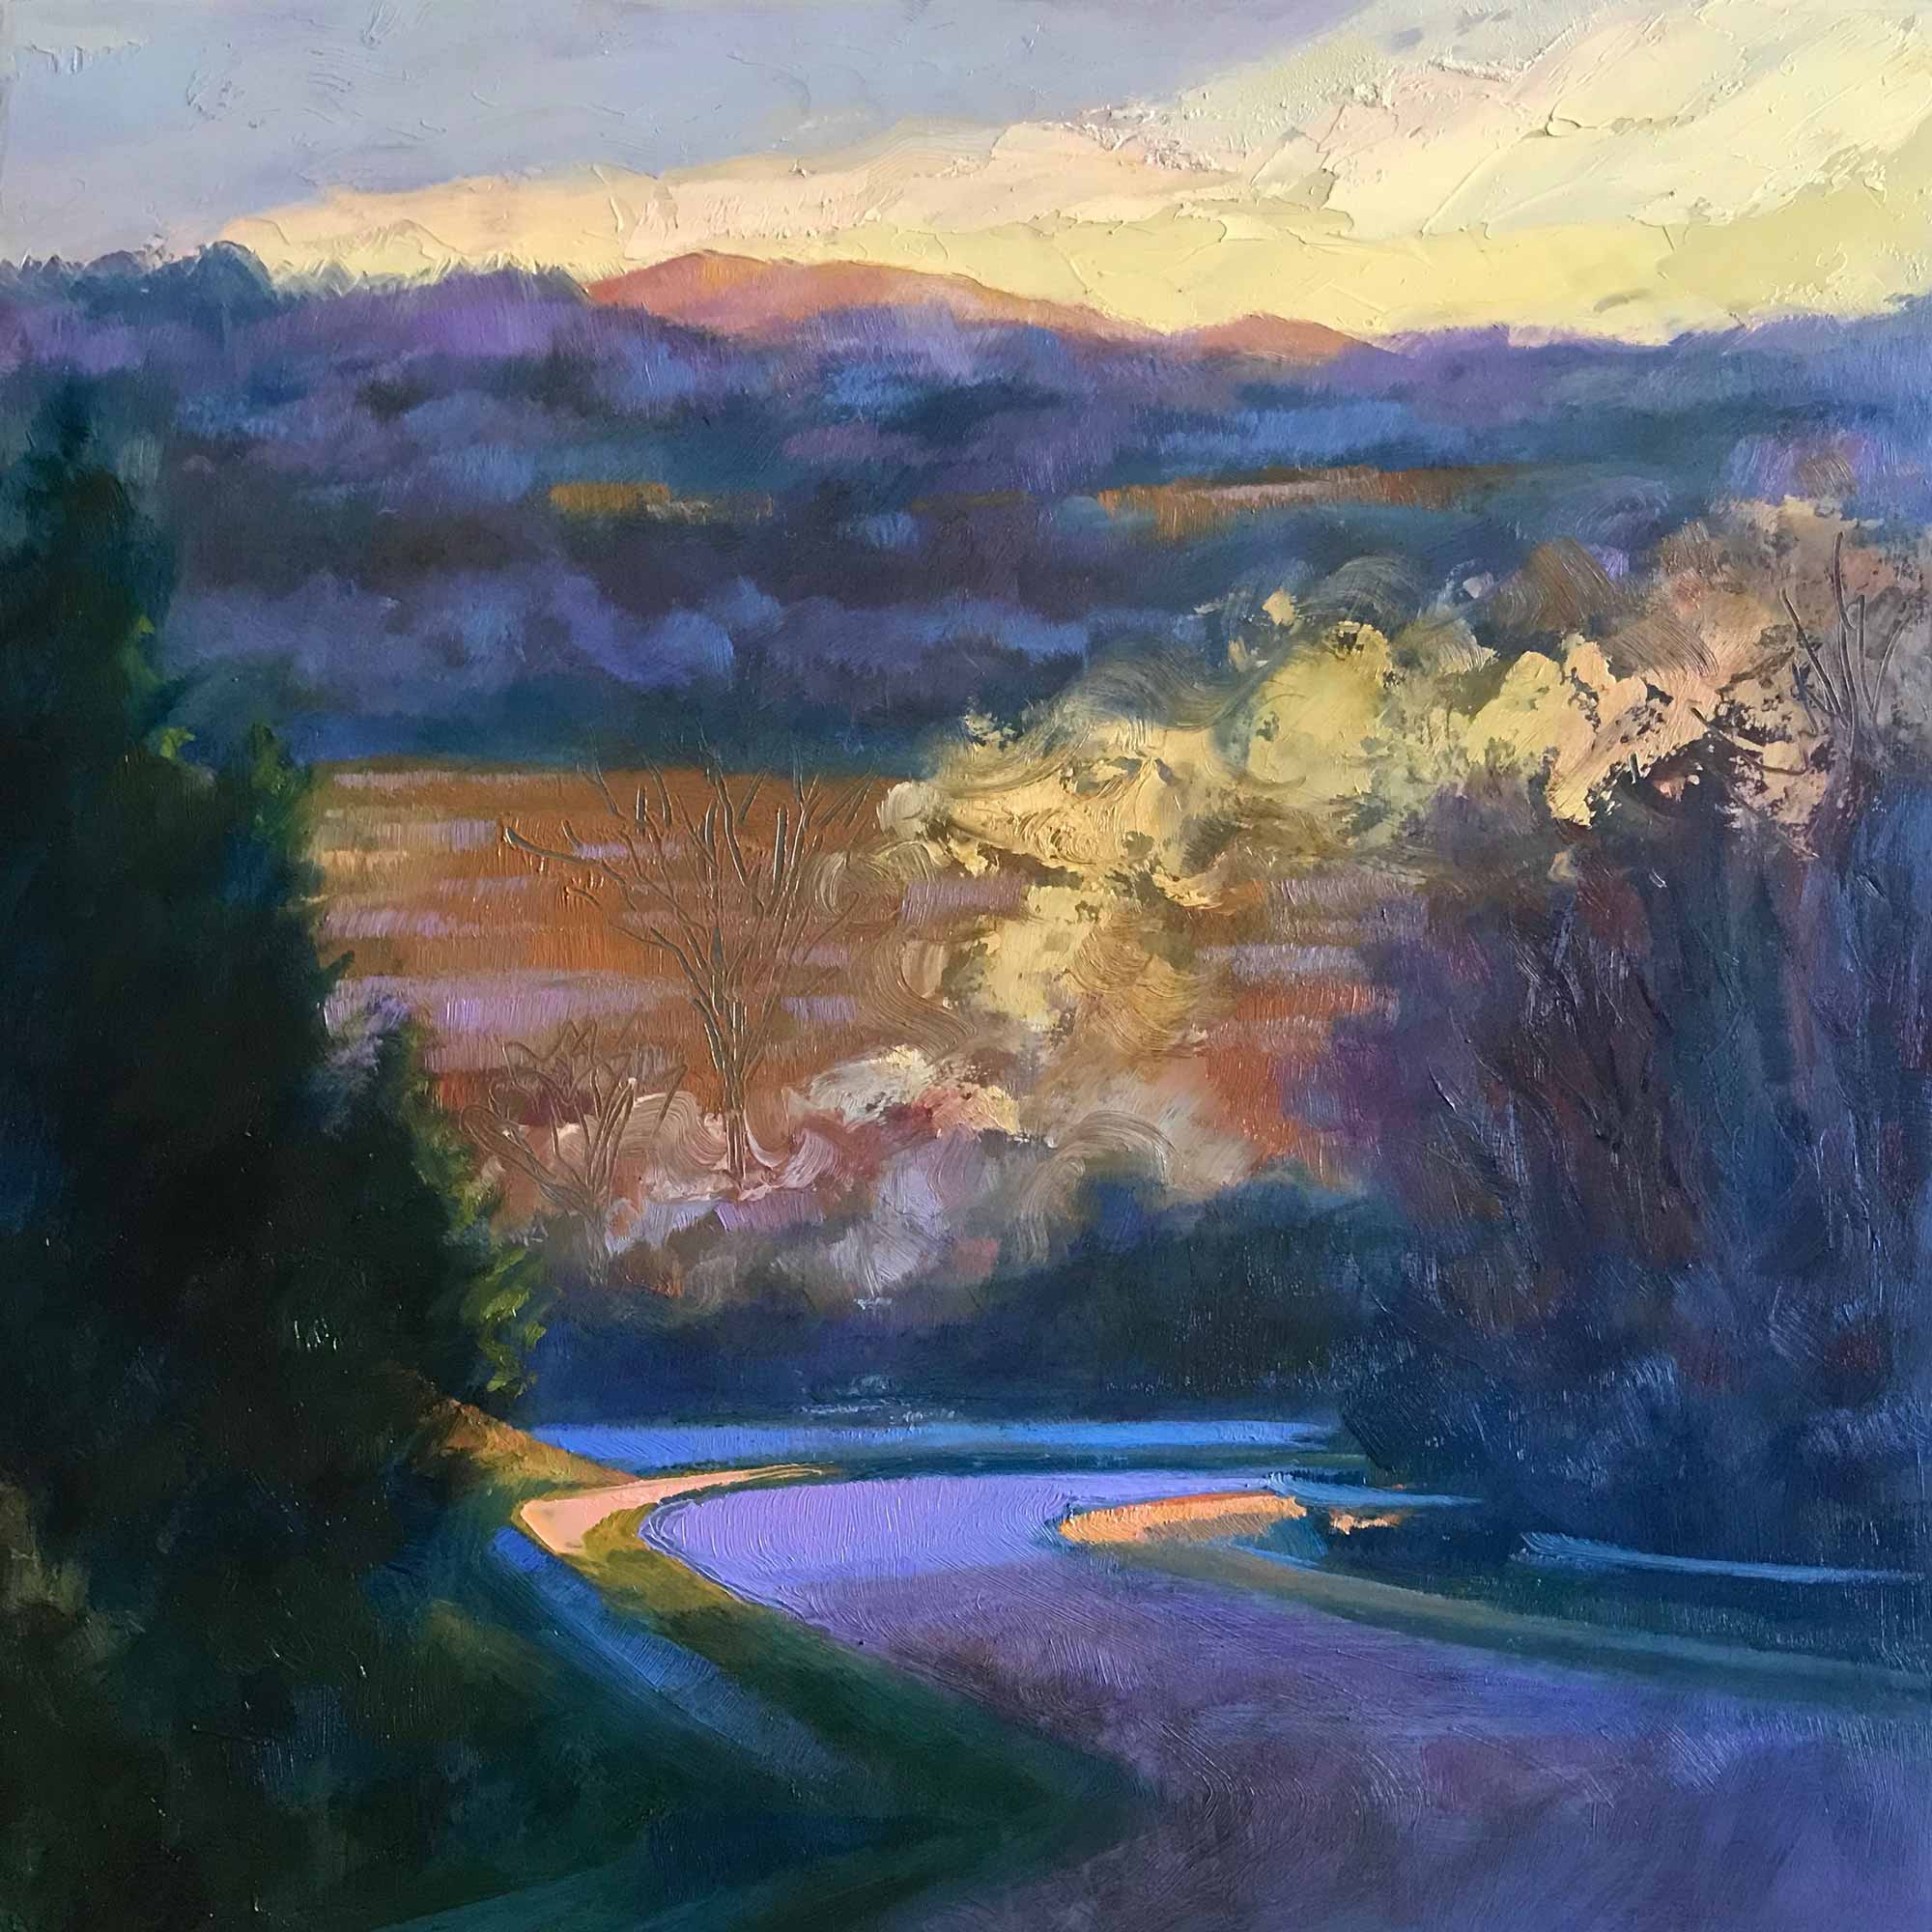 View from the Ridge No. 9, oil on panel, 8 x 8 inches, 2019, SOLD